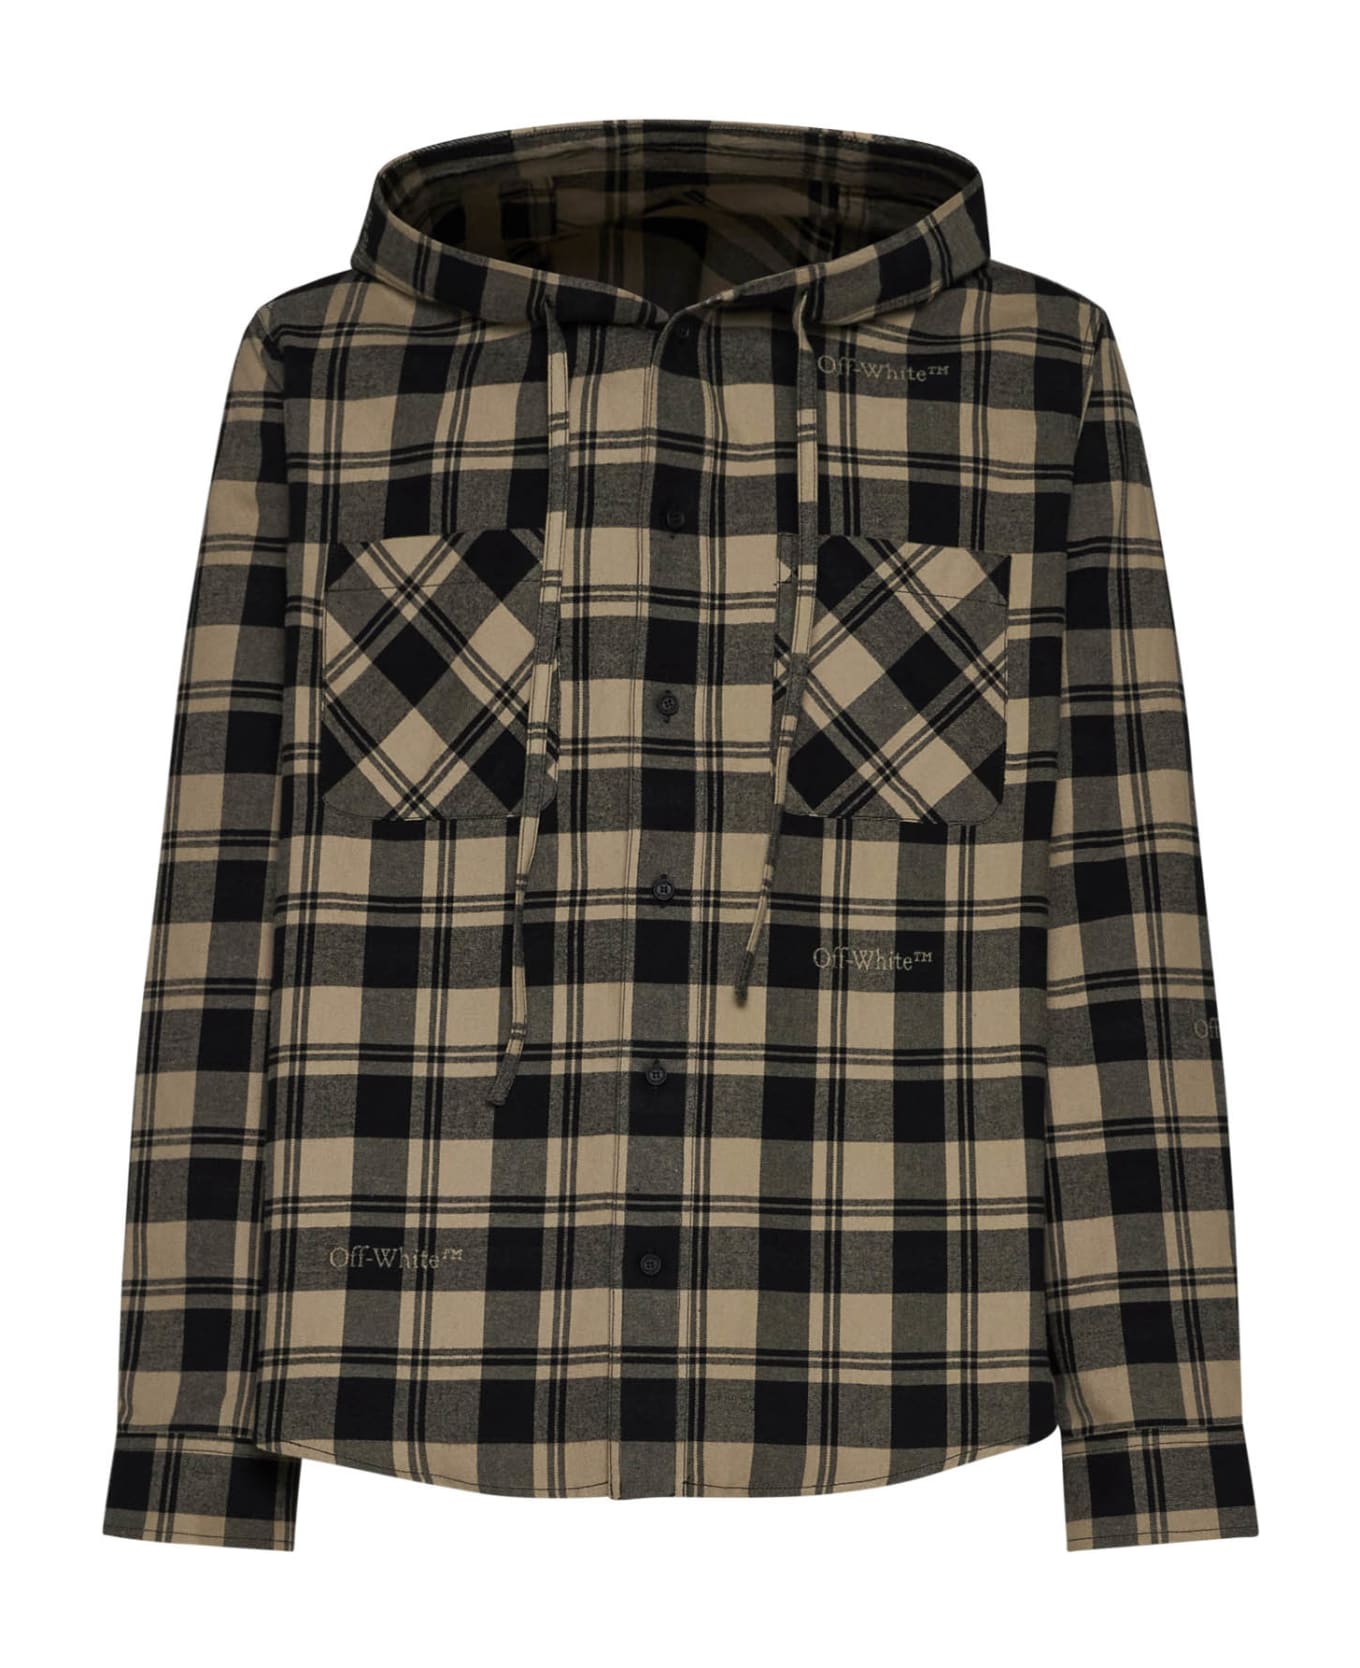 Off-White Flanel Hooded Check Shirt - Beige black no color